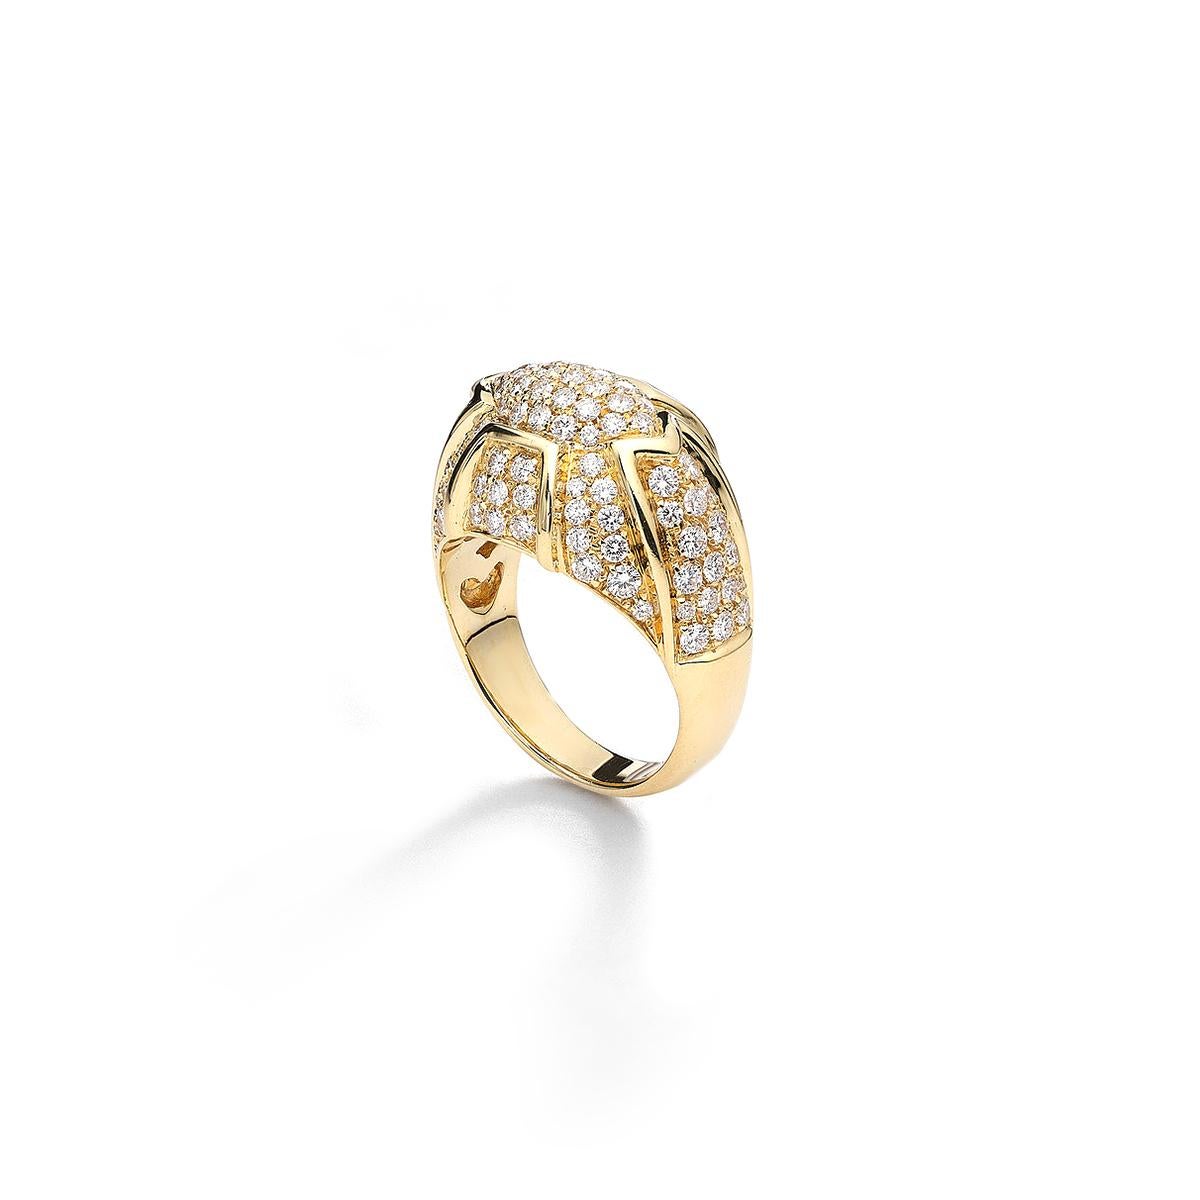 Ring in 18kt yellow gold set with 119 diamonds  1.96 cts Size 55  